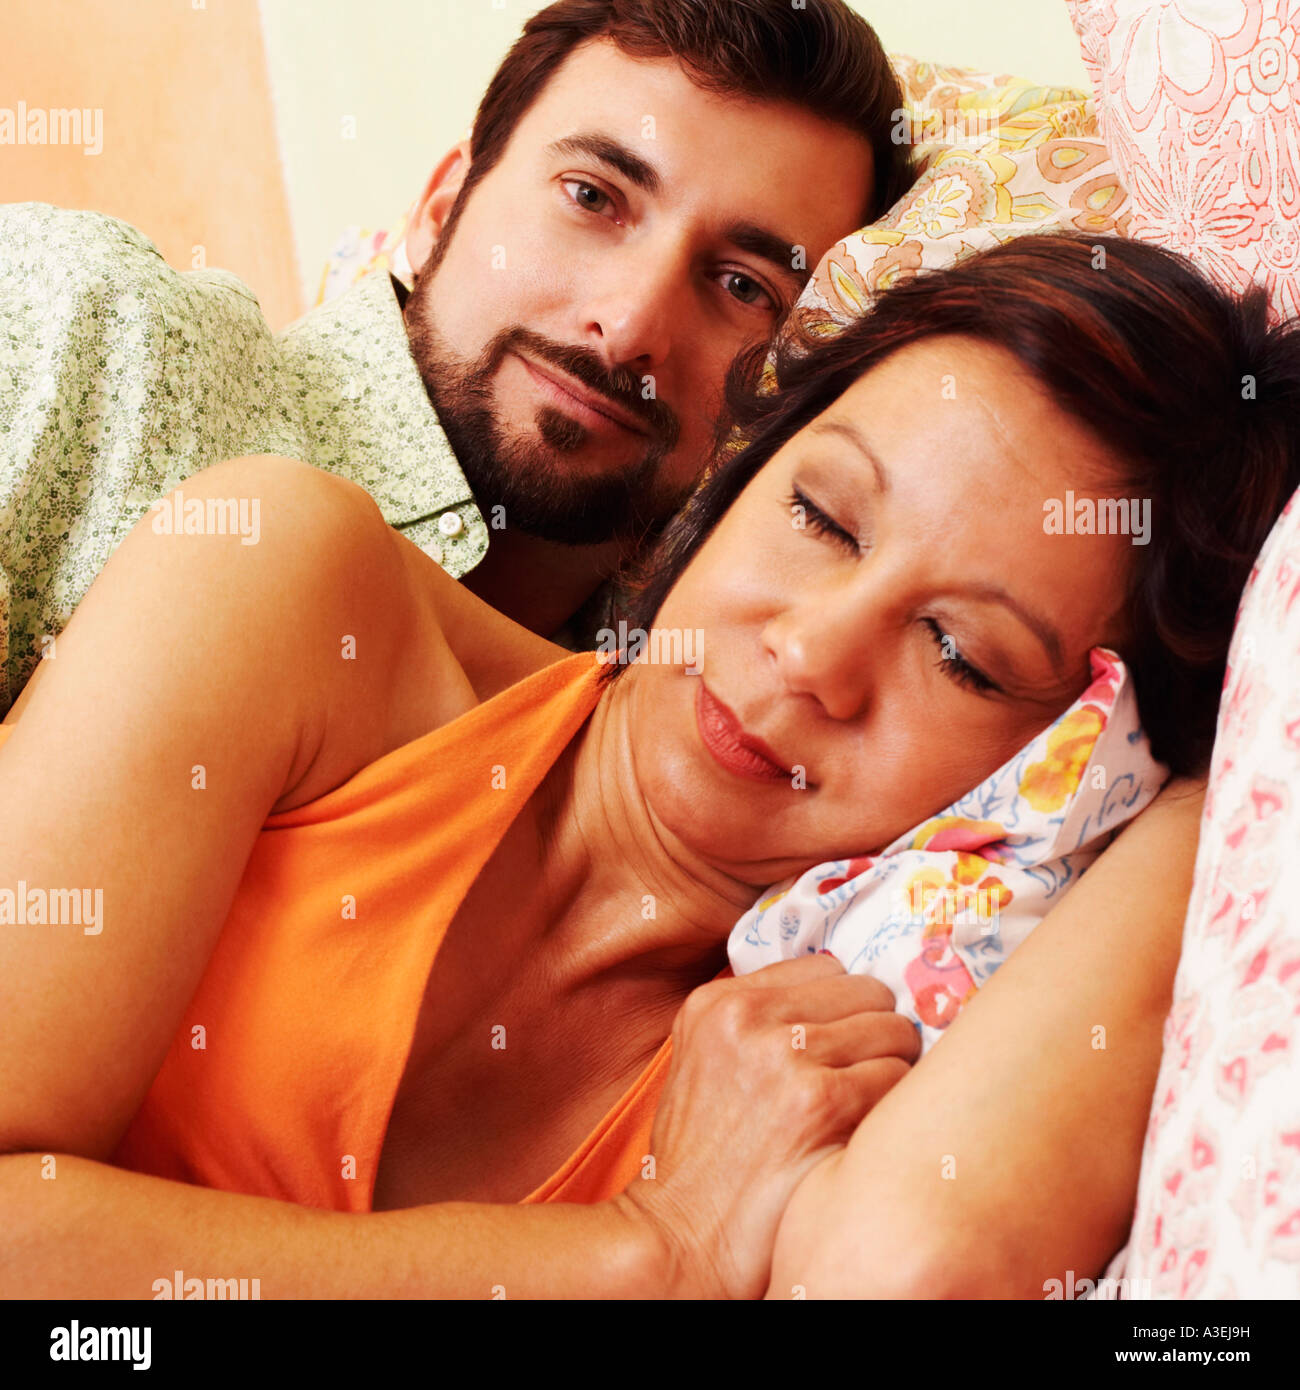 Close-up of a mature woman sleeping with a mature man lying behind her Stock Photo